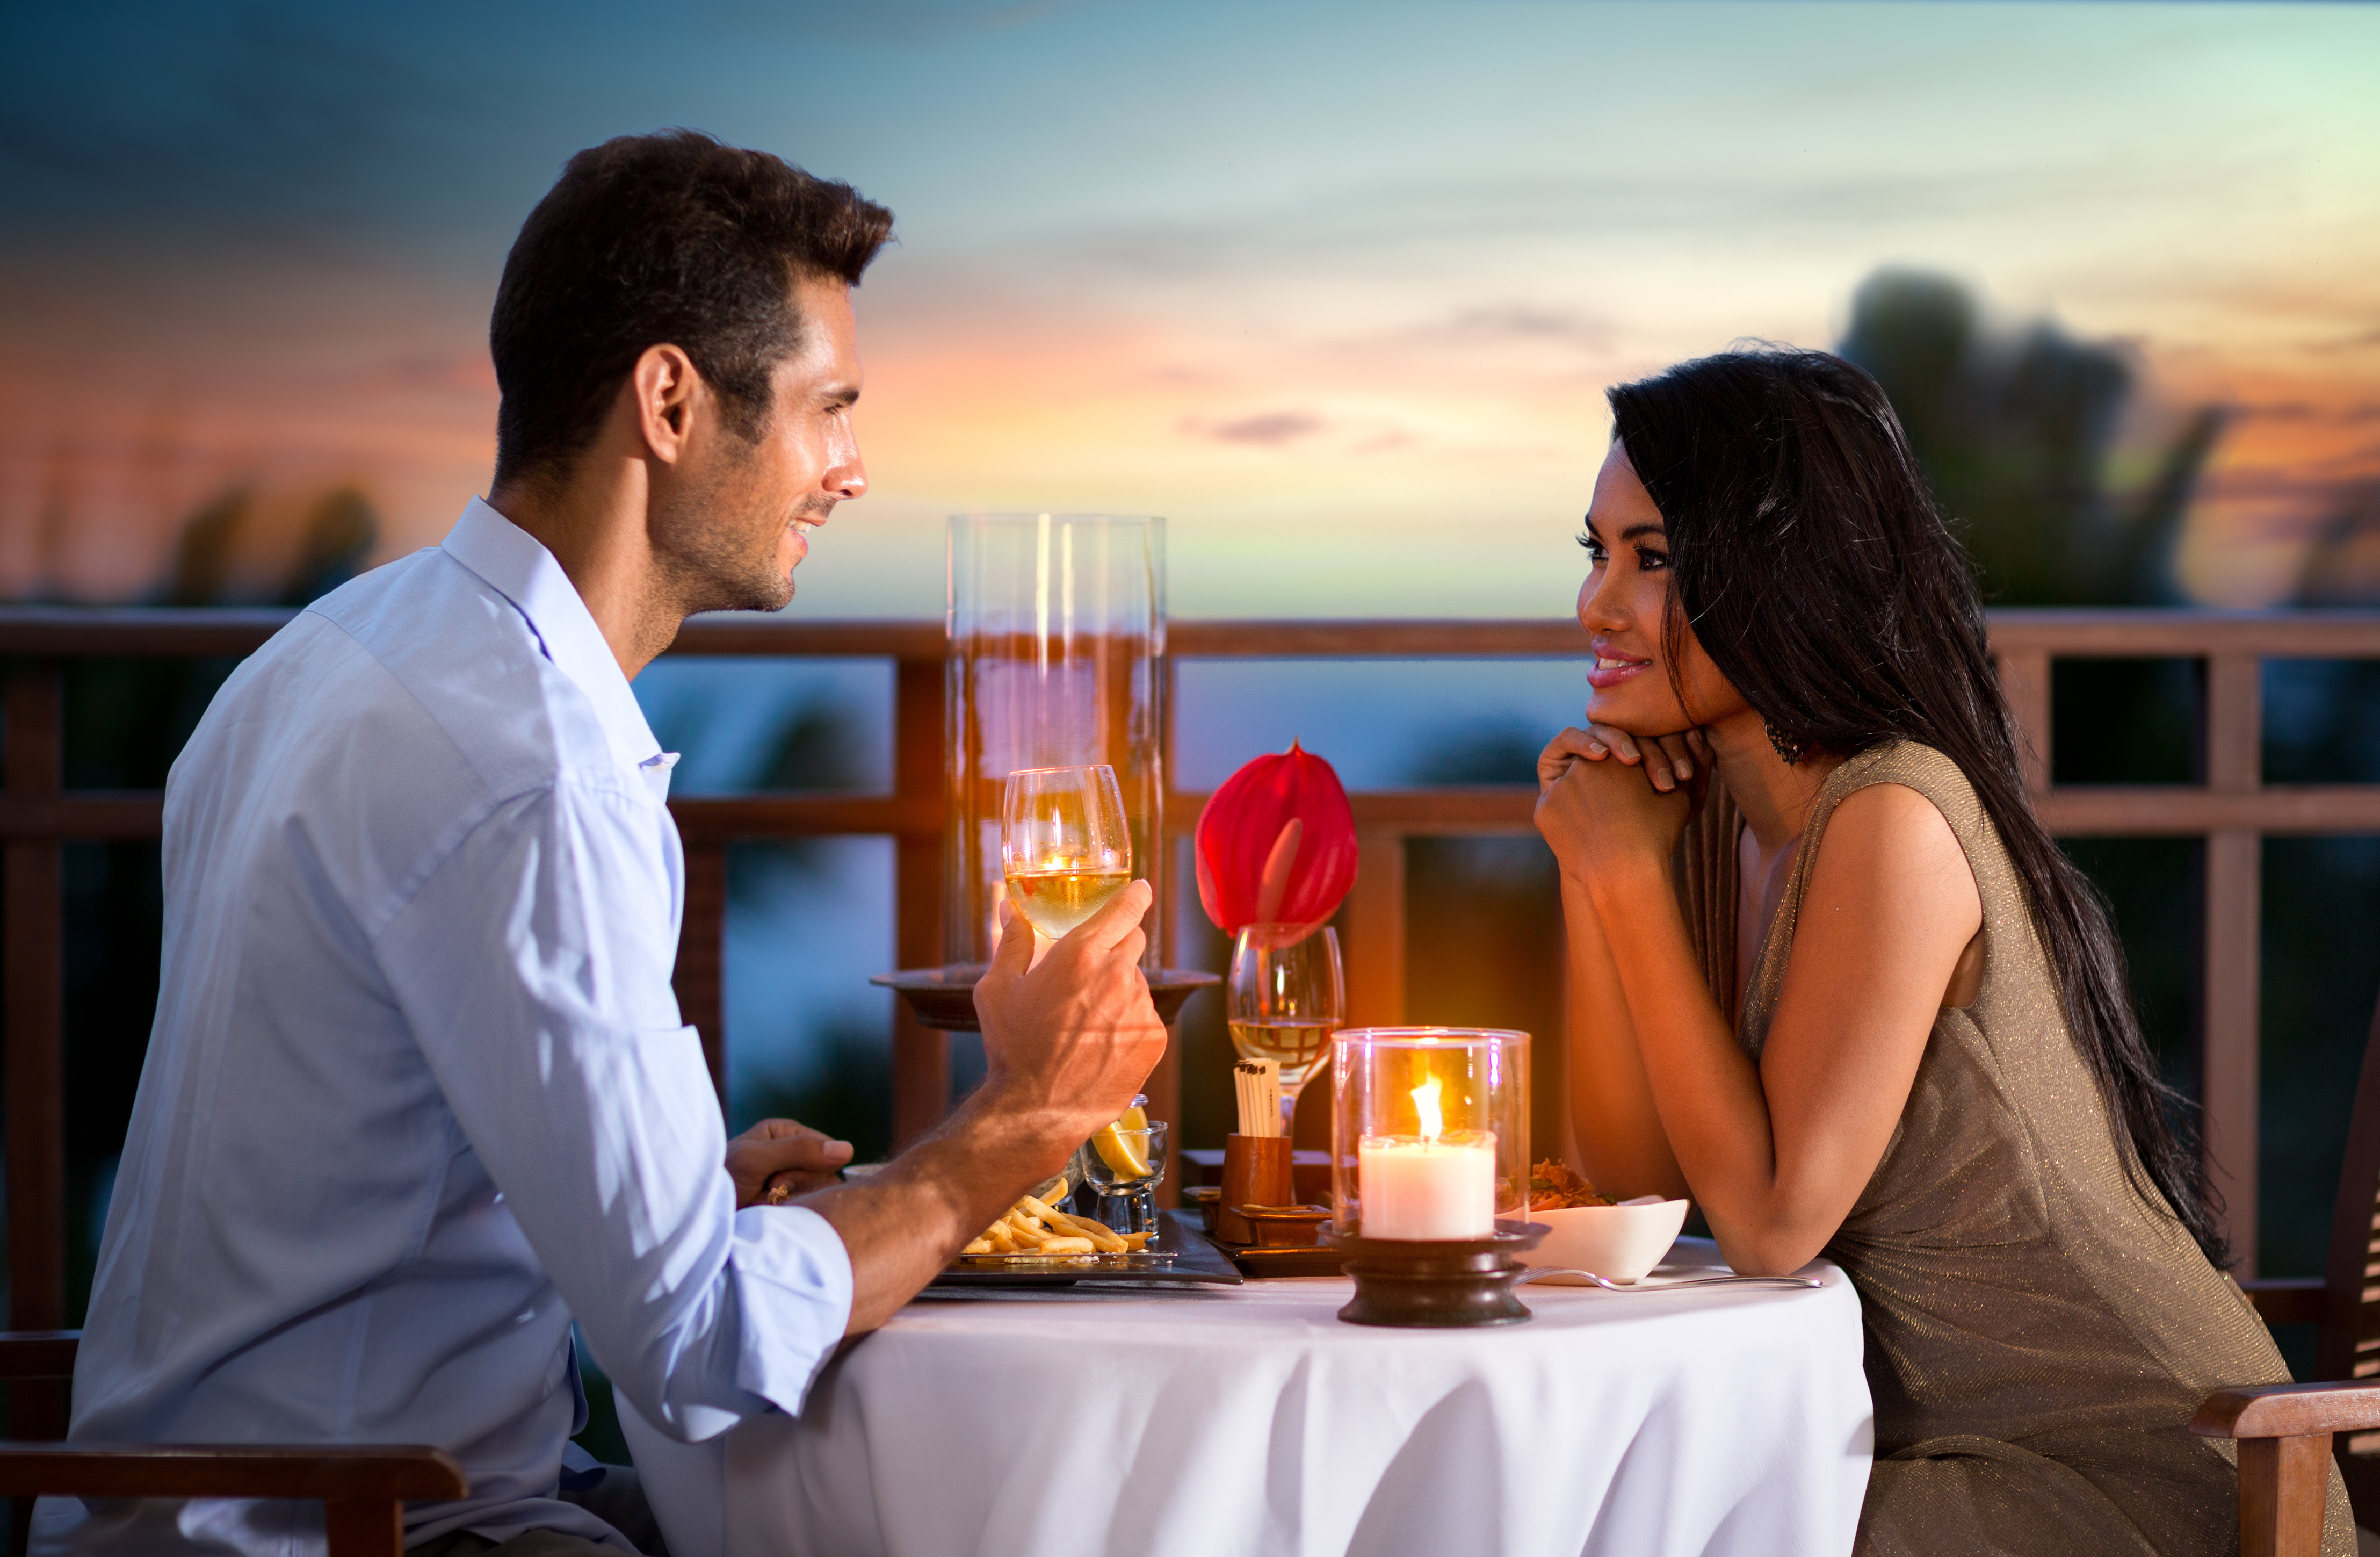 A happy couple on a summer evening having a romantic dinner outdoors | Source: Shutterstock